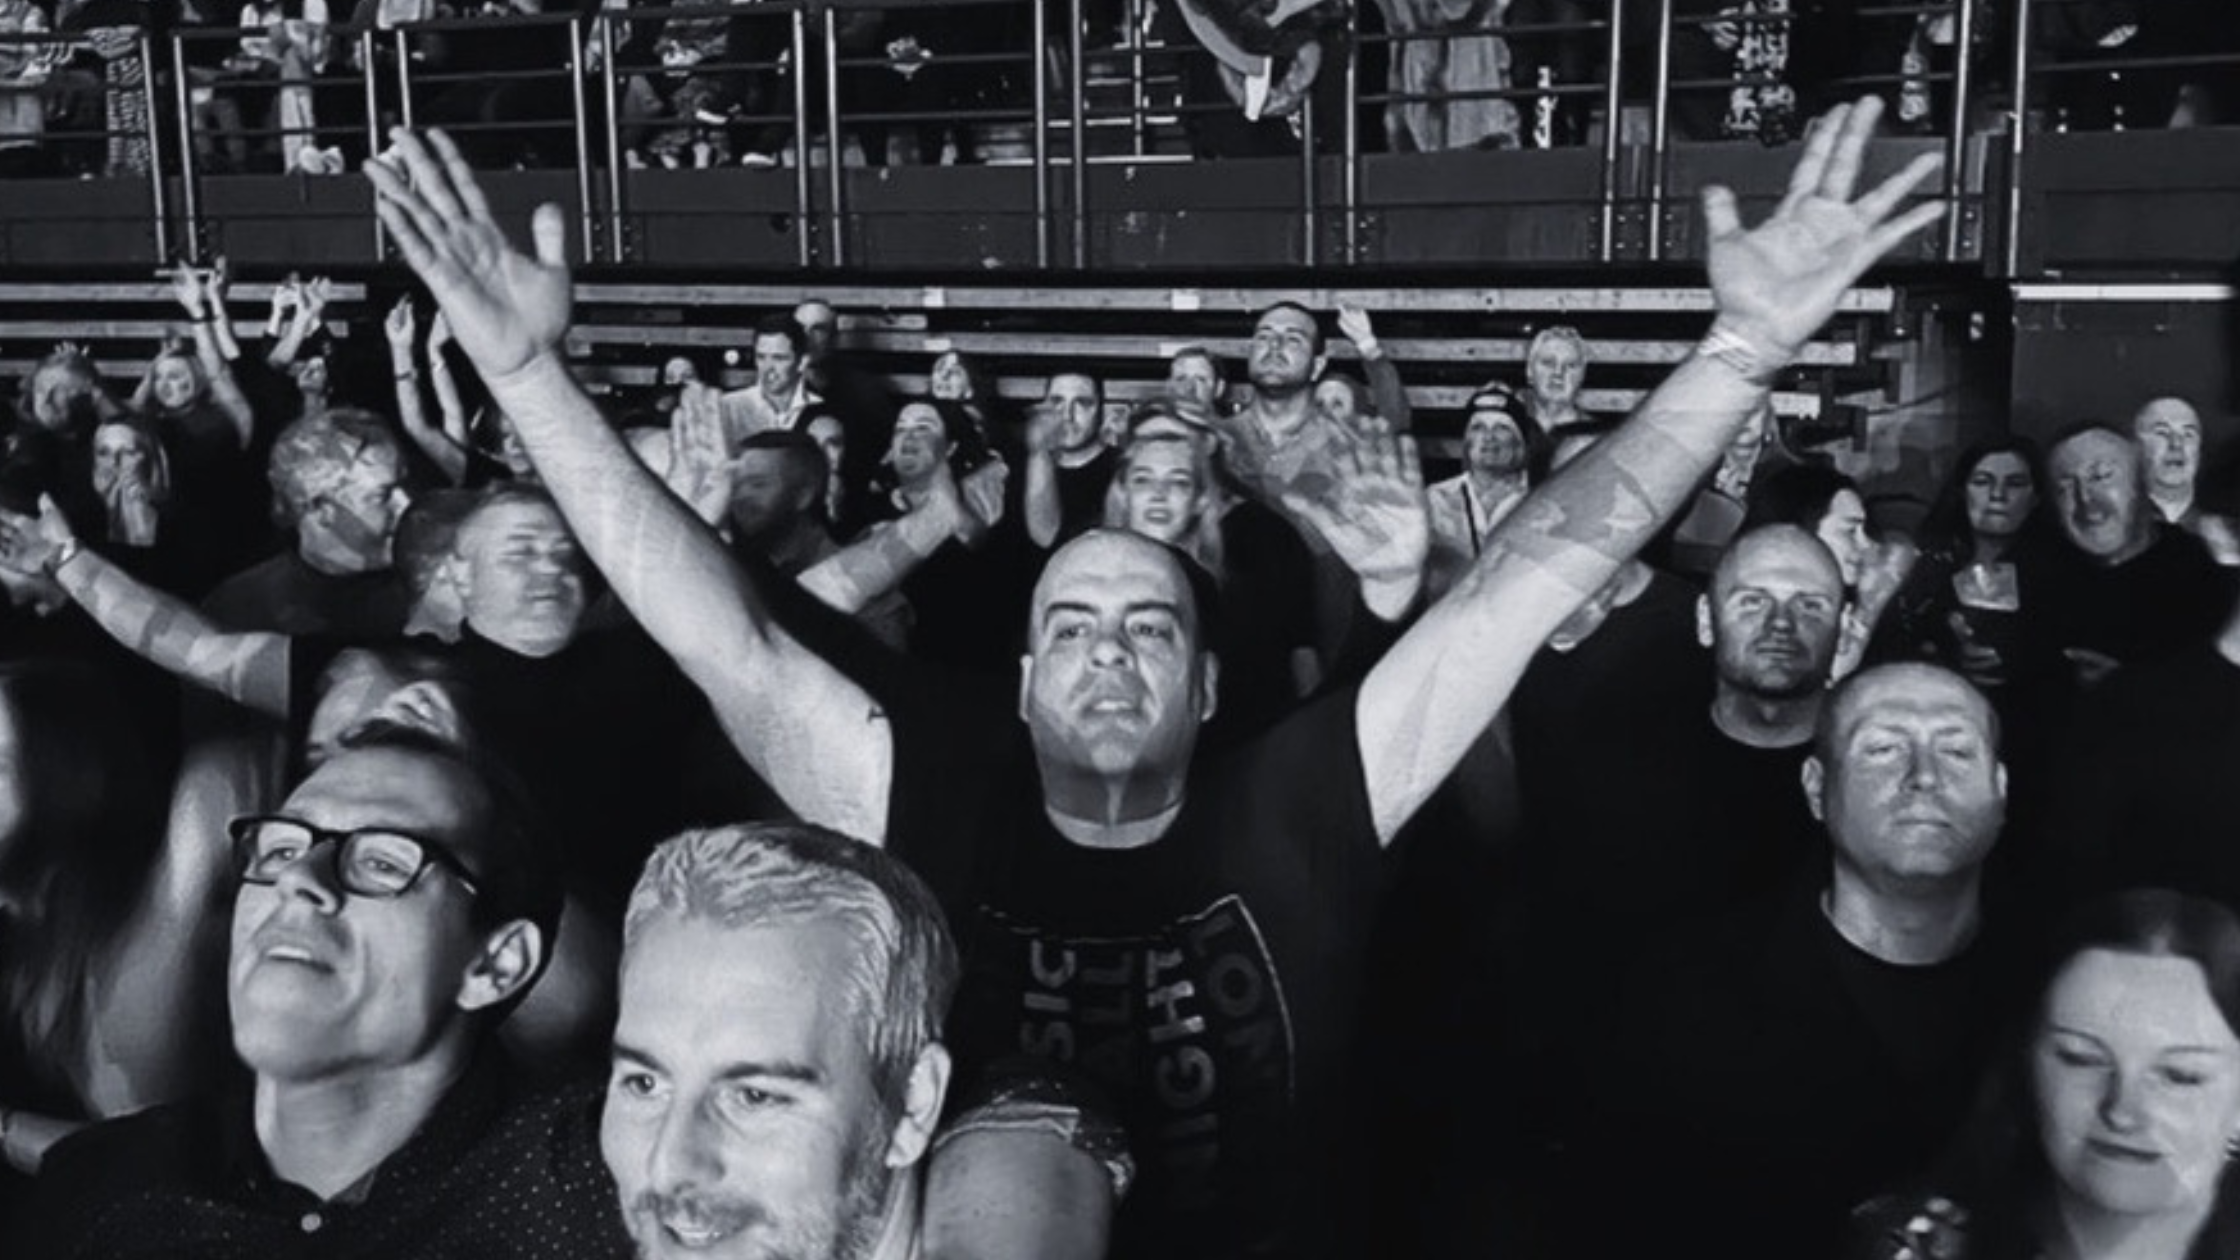 Black and white image of a man in a concert hall. A man is the centre reaches he arms up.